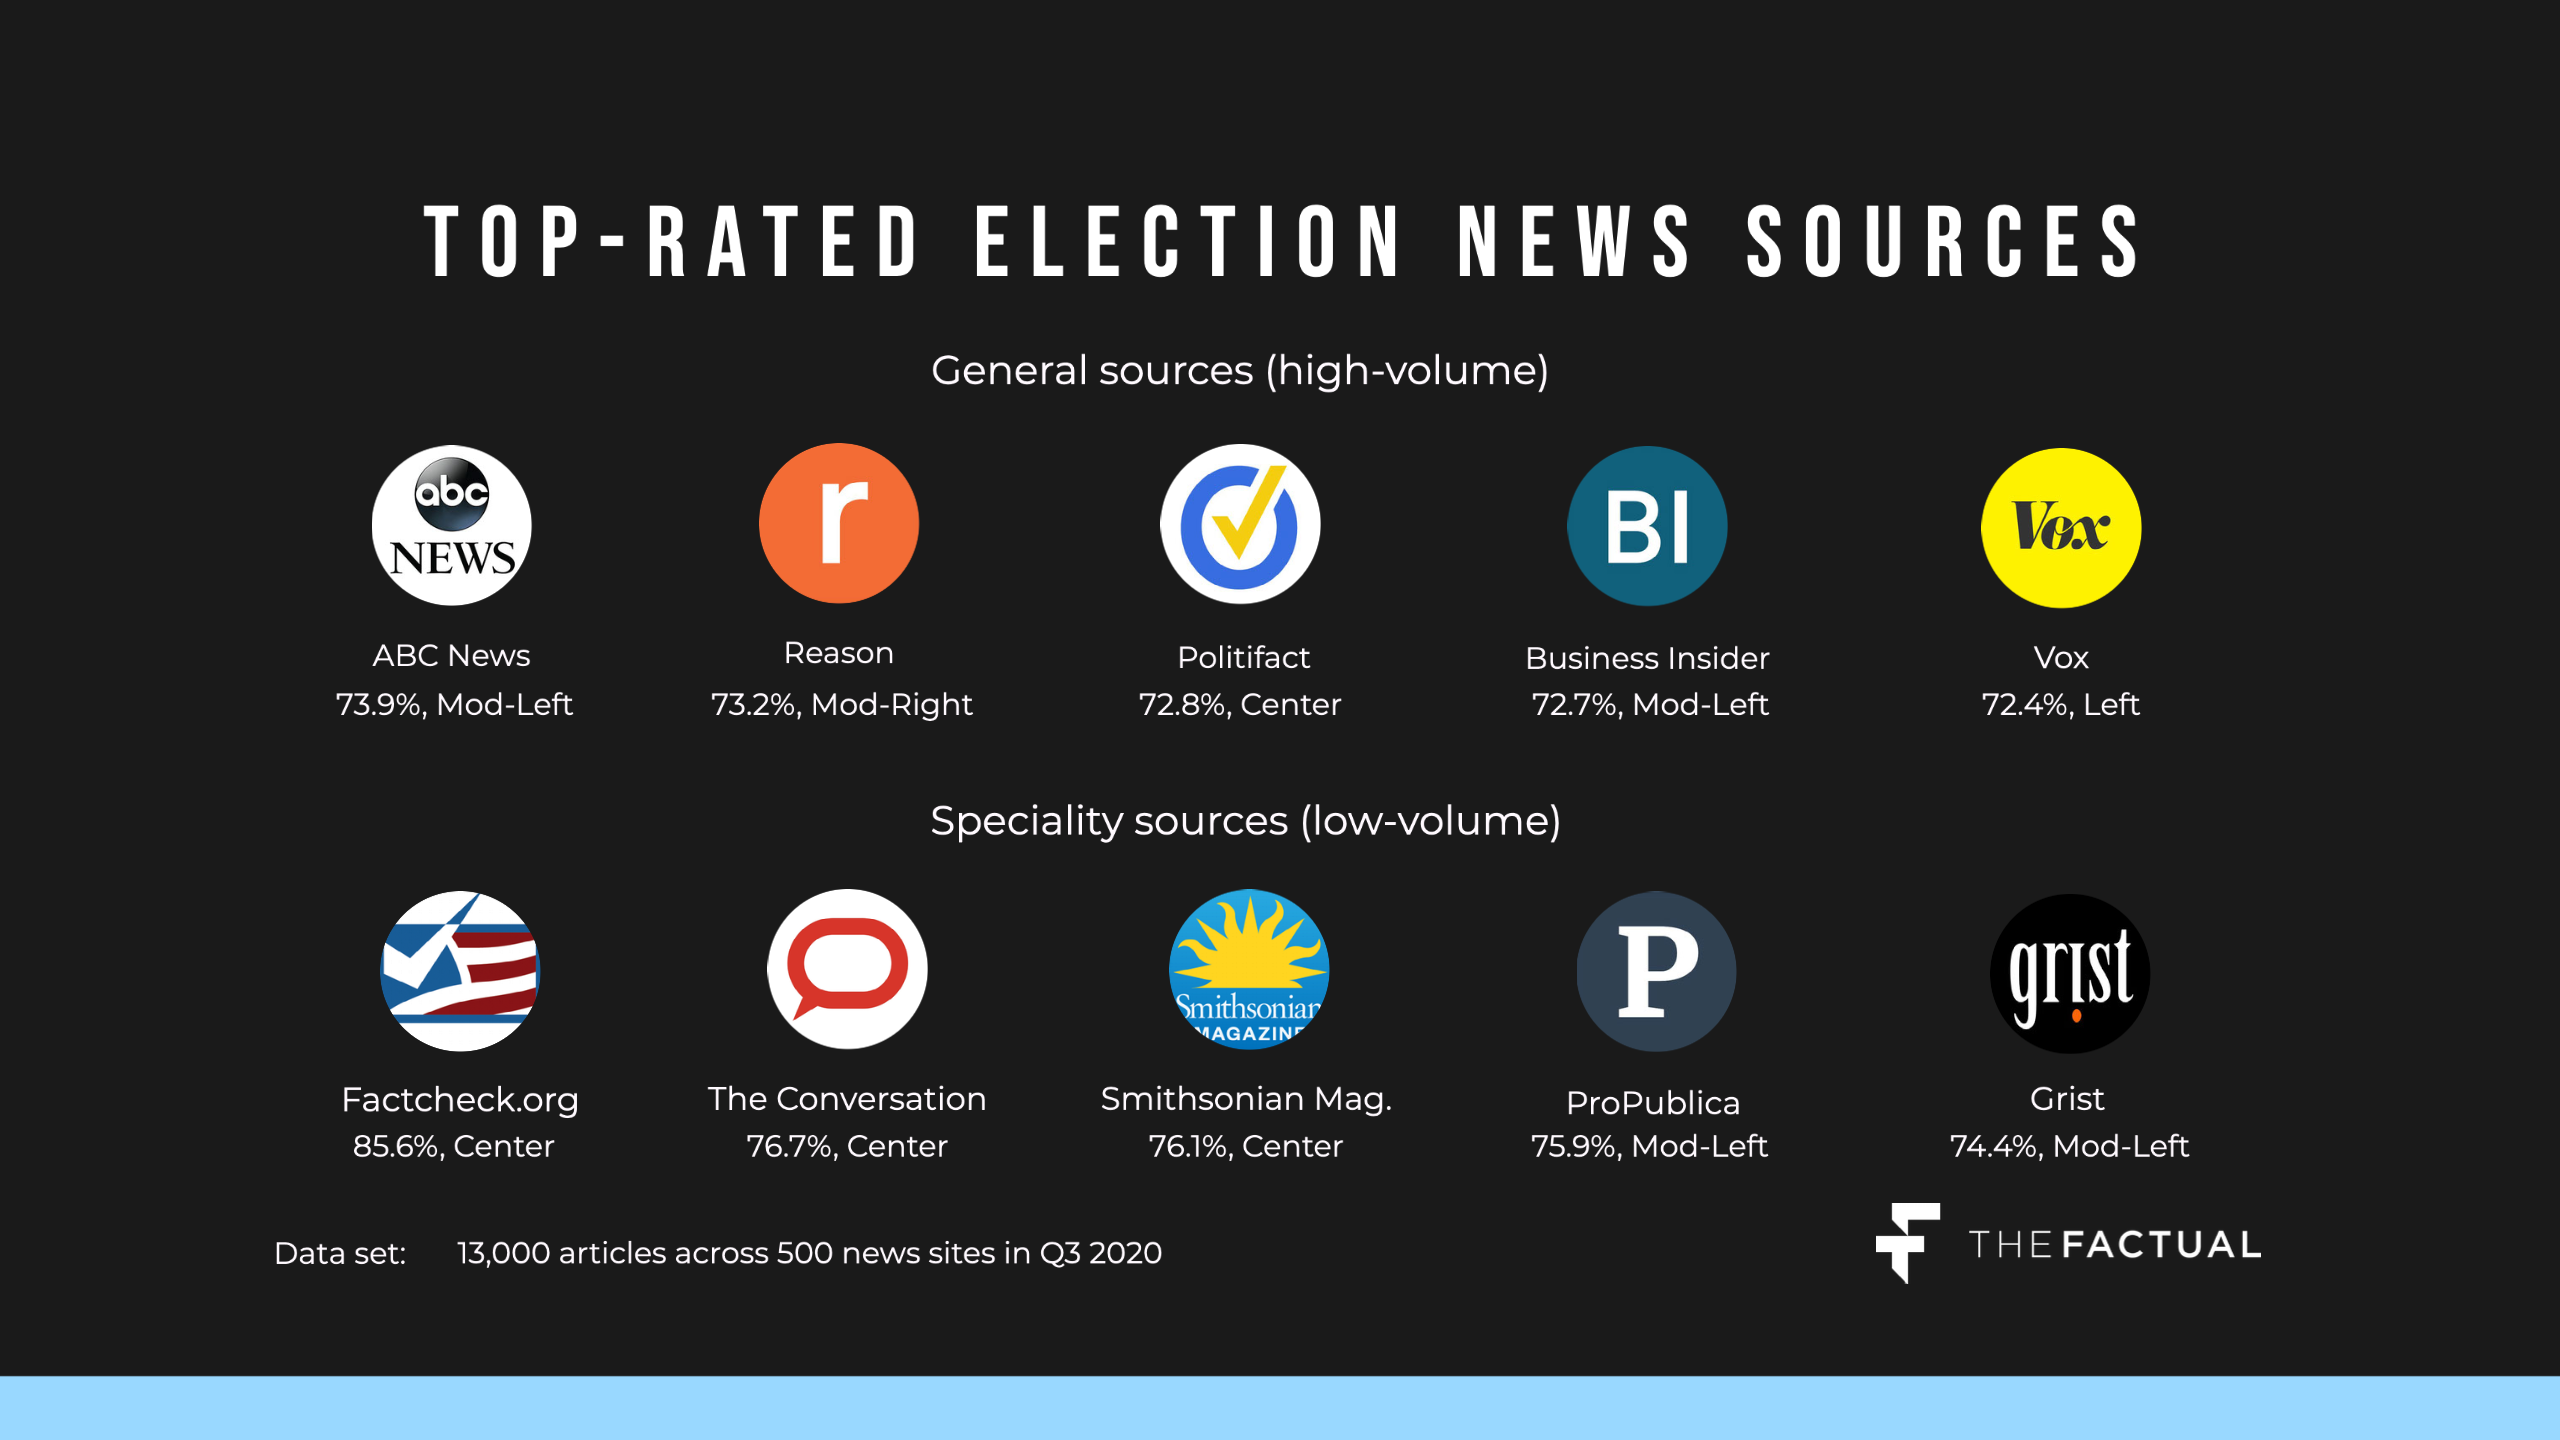 The Factual’s Most Credible Sources for Election News